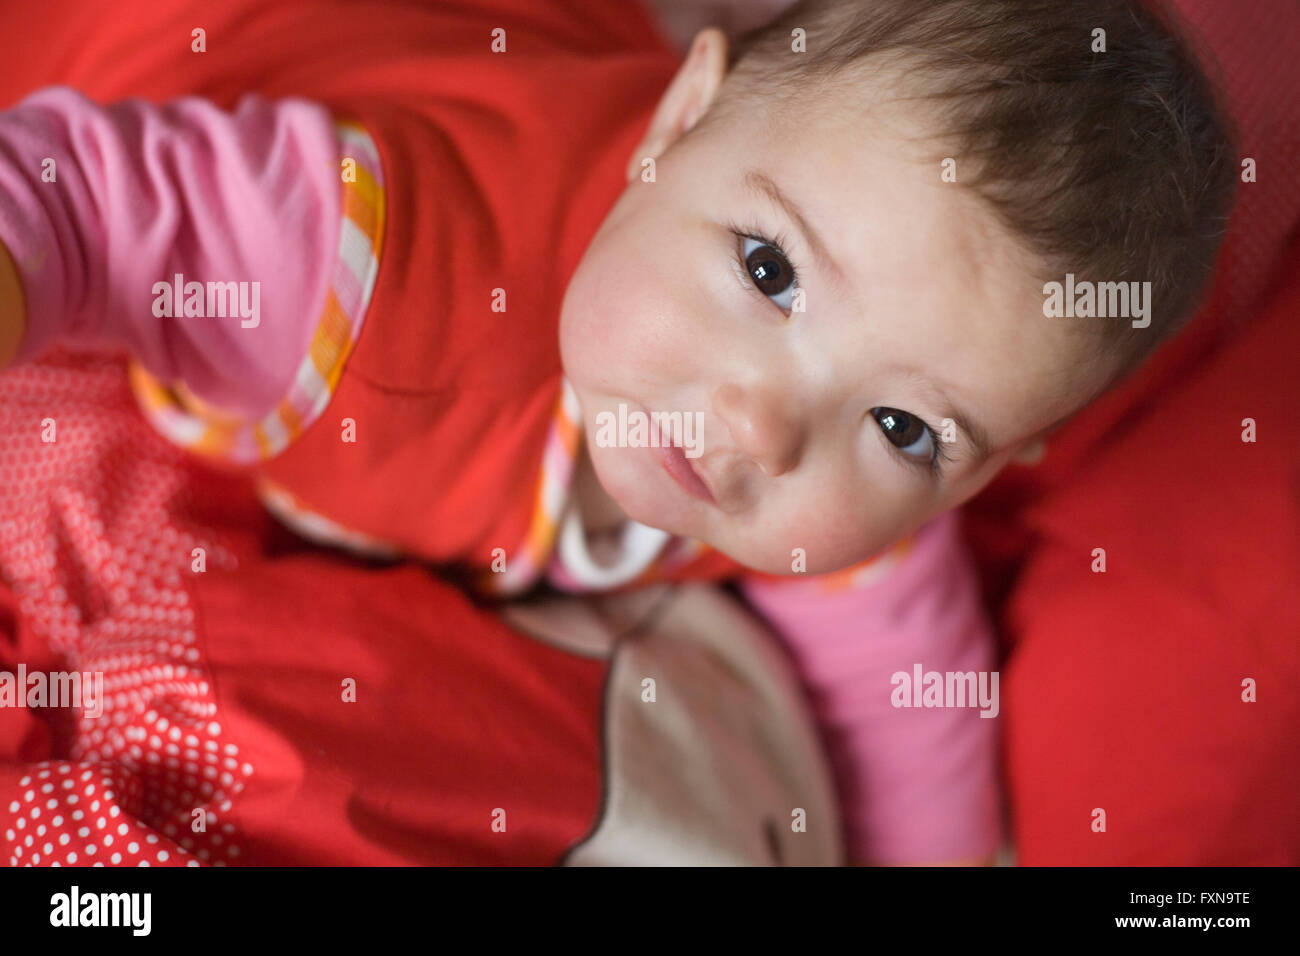 Little baby girl with beautiful dark eyes looking up just after awakening. Red bed clothes background Stock Photo